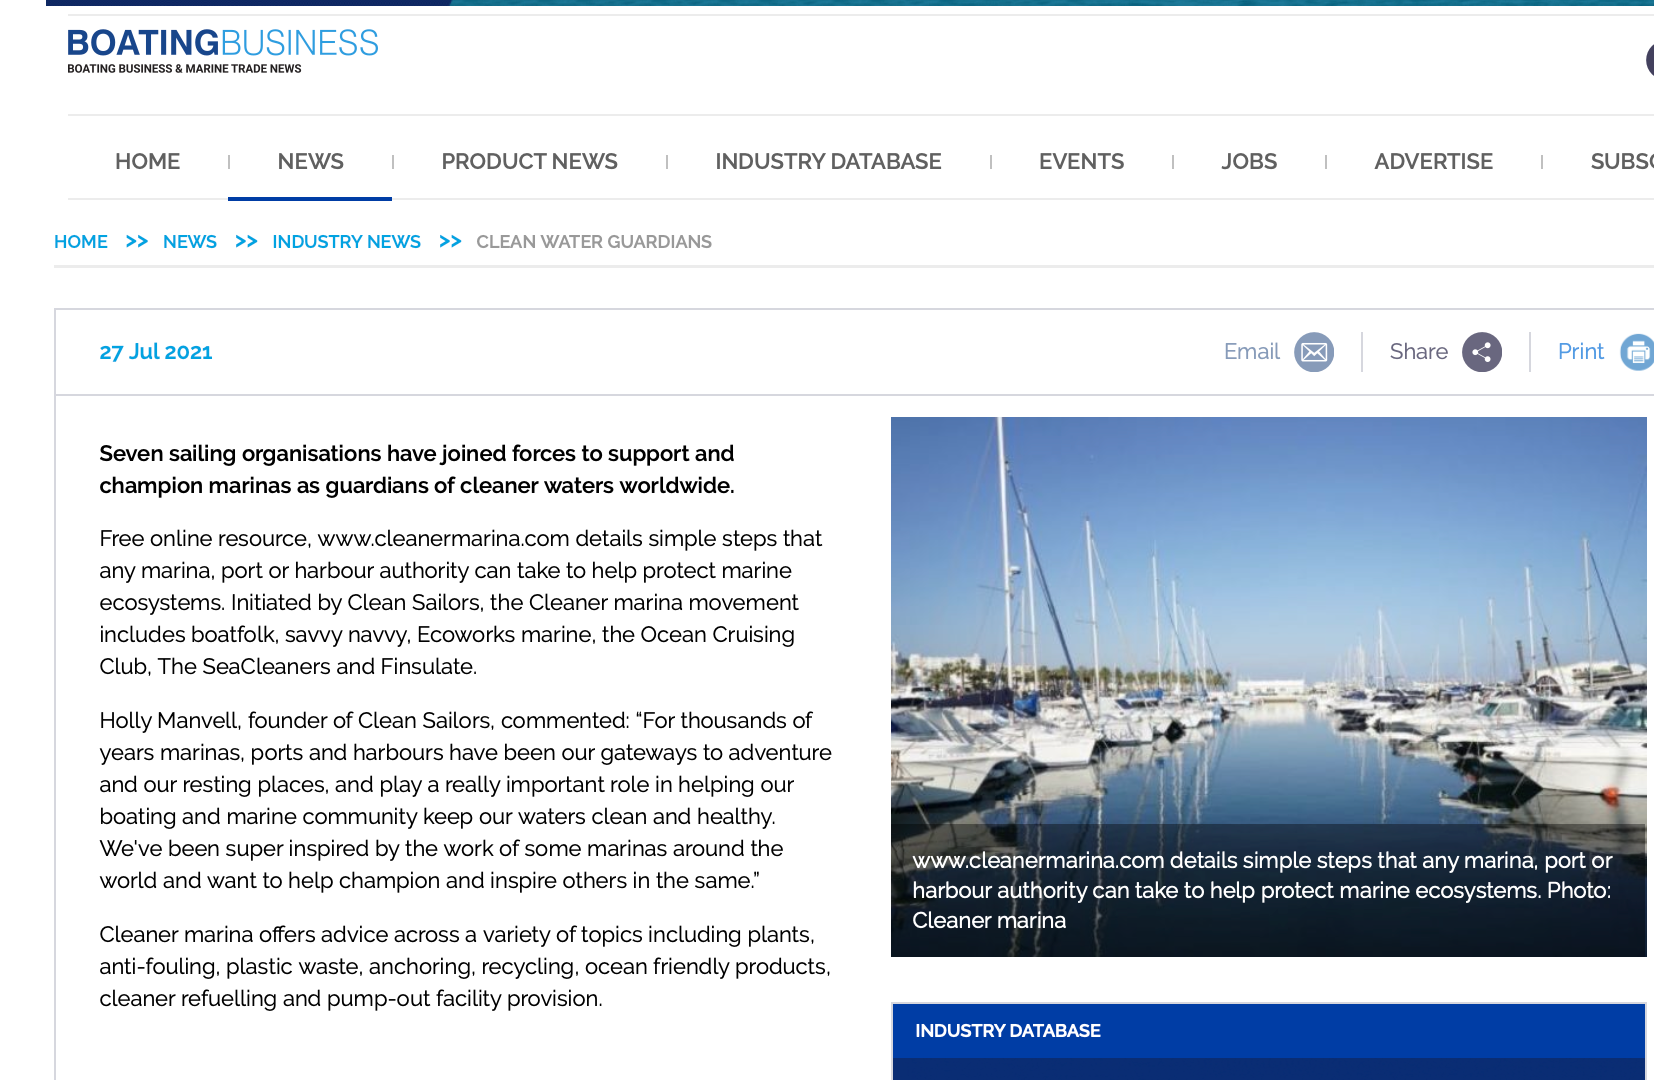 New initiative, Cleaner marina, featured by Boating Business